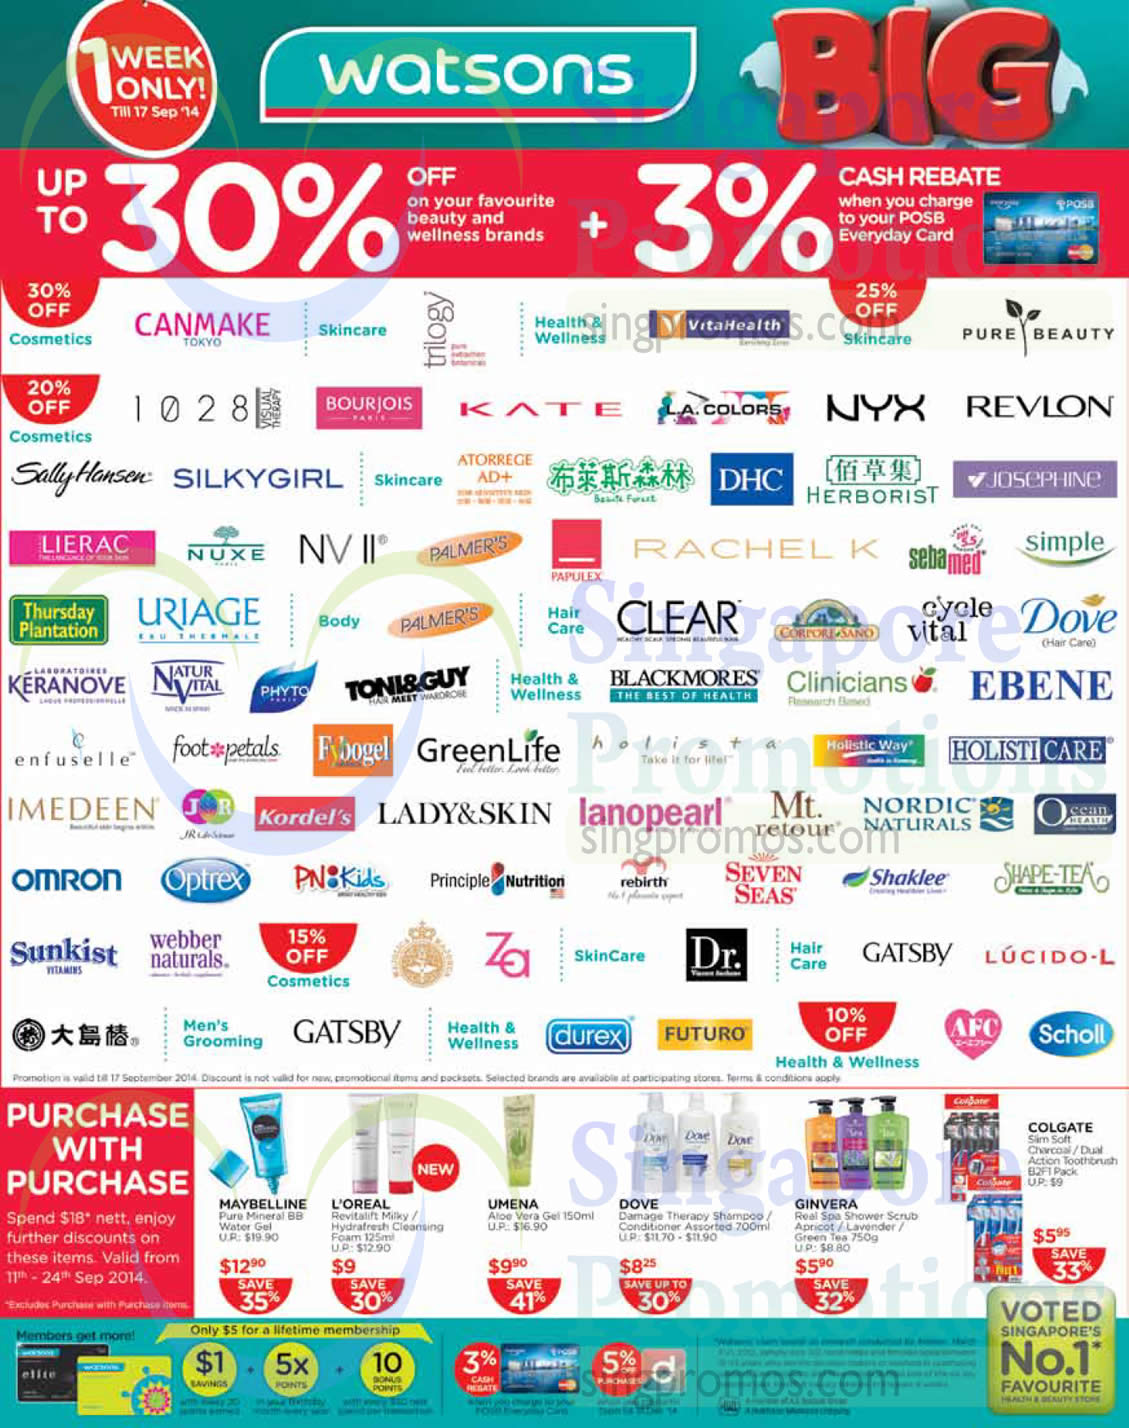 Featured image for Watsons Personal Care, Health, Cosmetics & Beauty Offers 11 - 17 Sep 2014